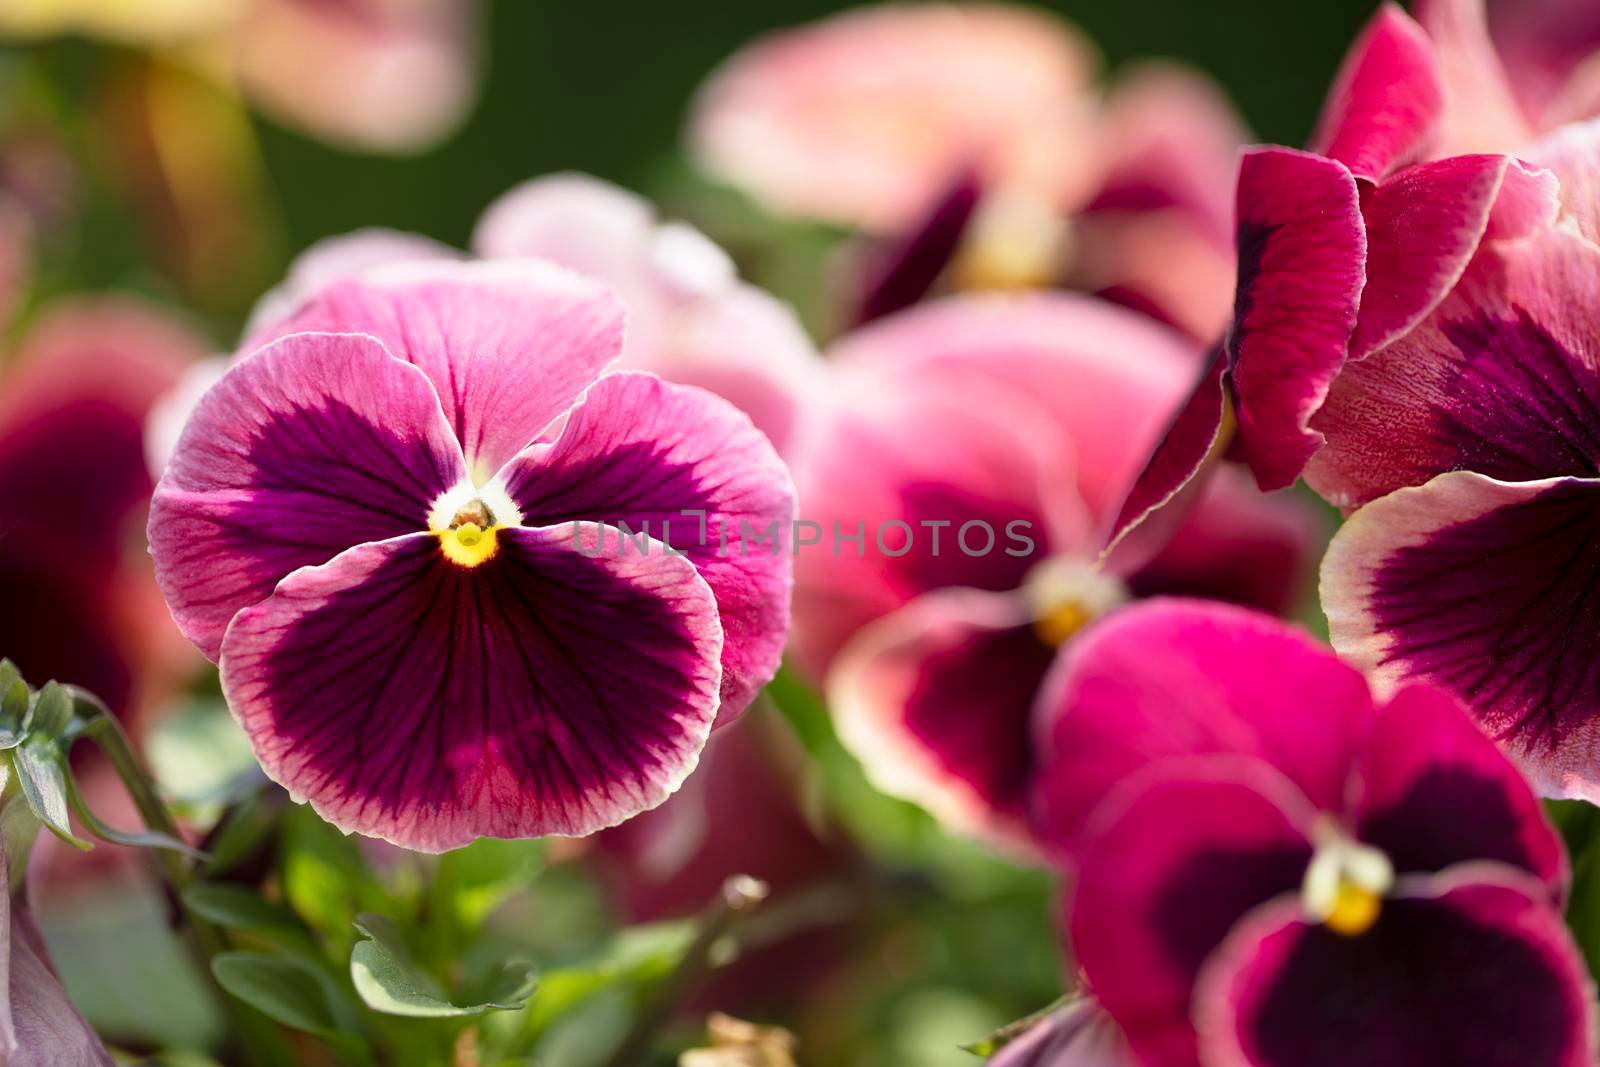 Close up of bright magenta pansy with deep purple blotch and yellow center